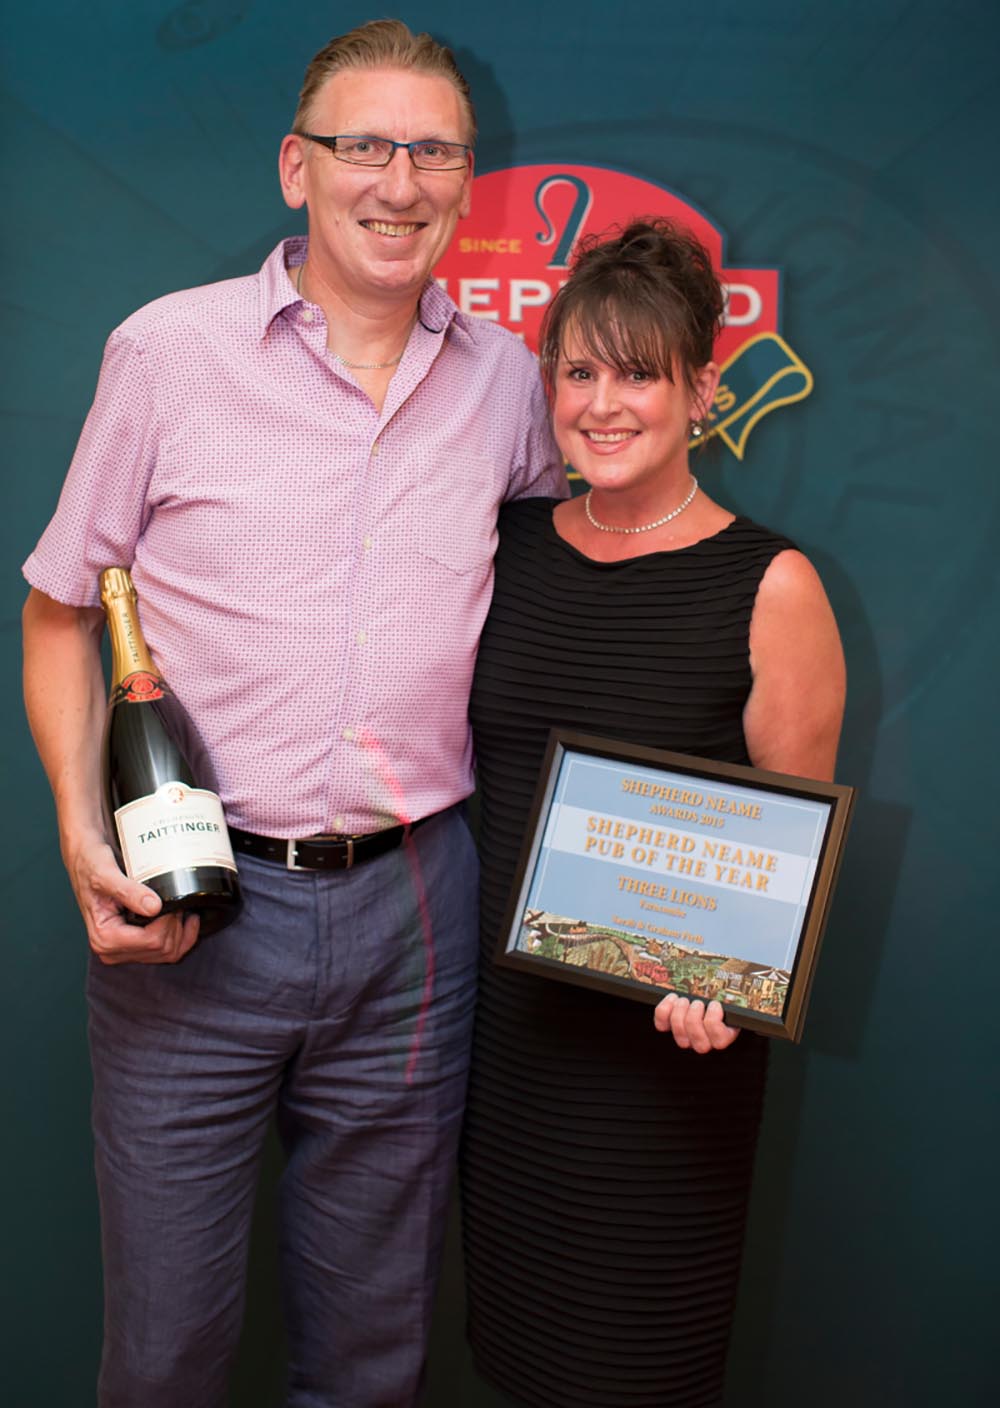 2015 Awards - Pub of the Year winners - Sarah and Graham Firth, Three Lions, Farncombe